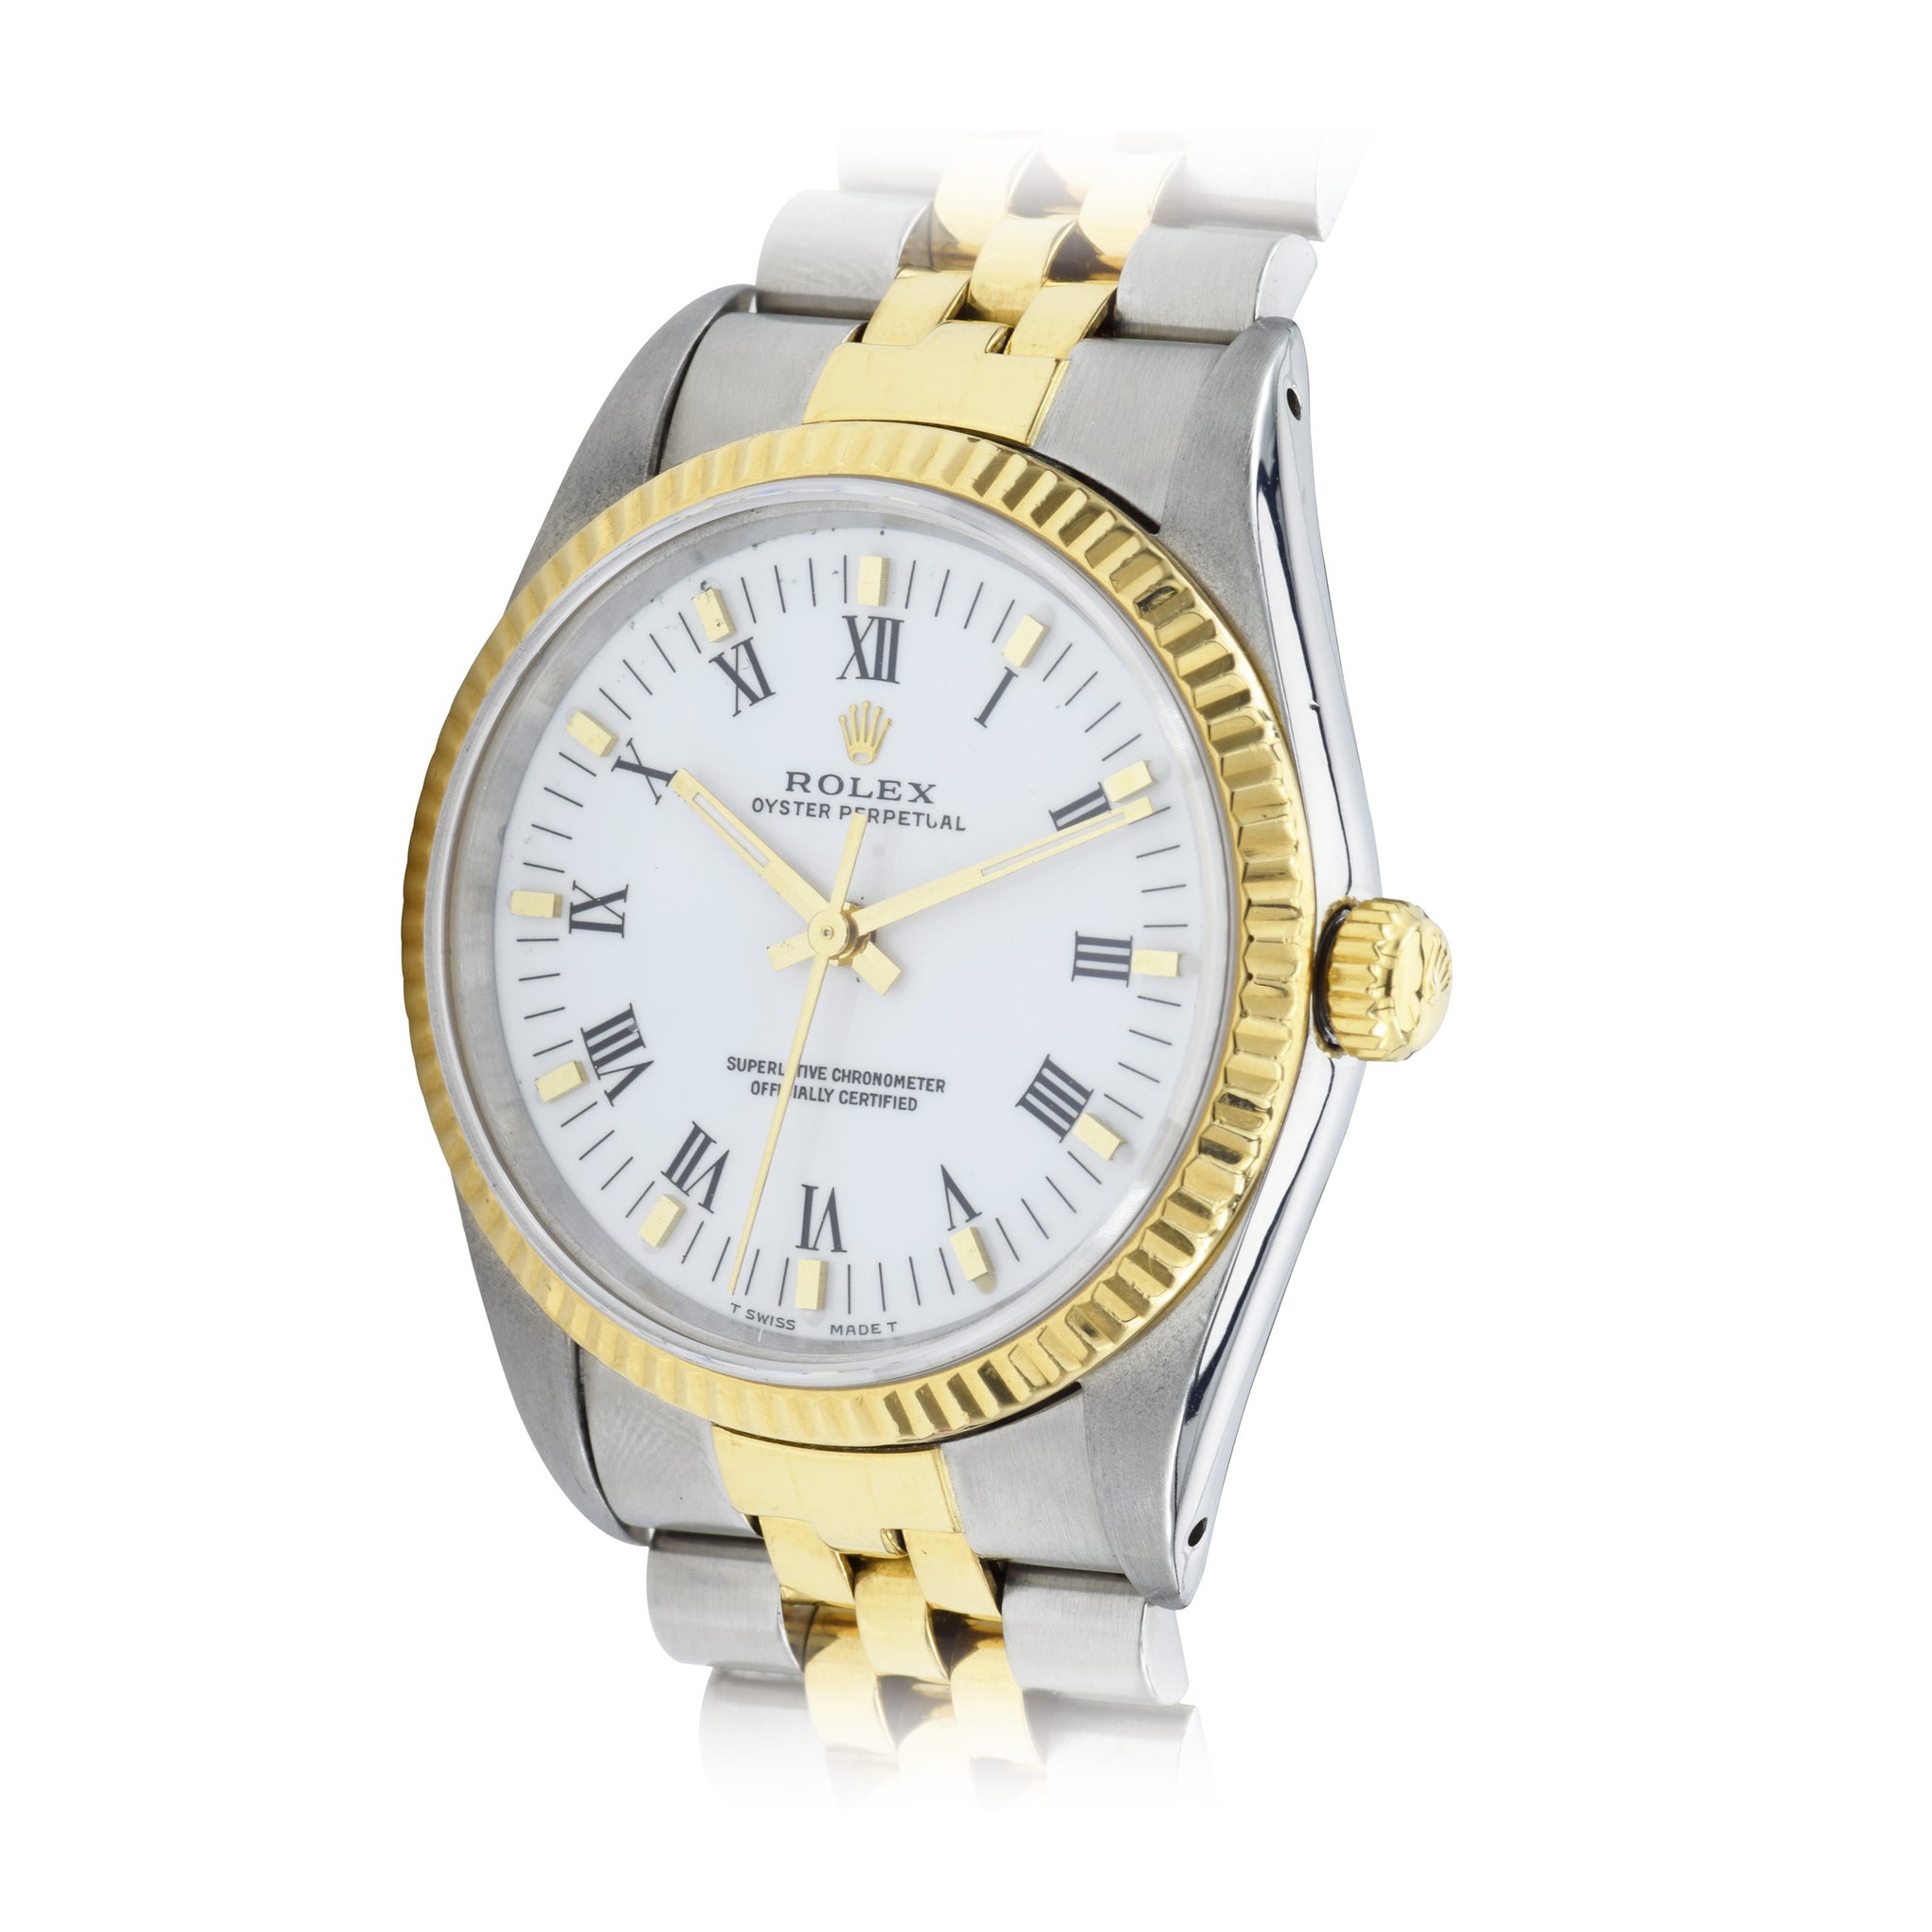 Rolex Oyster Perpetual 14233